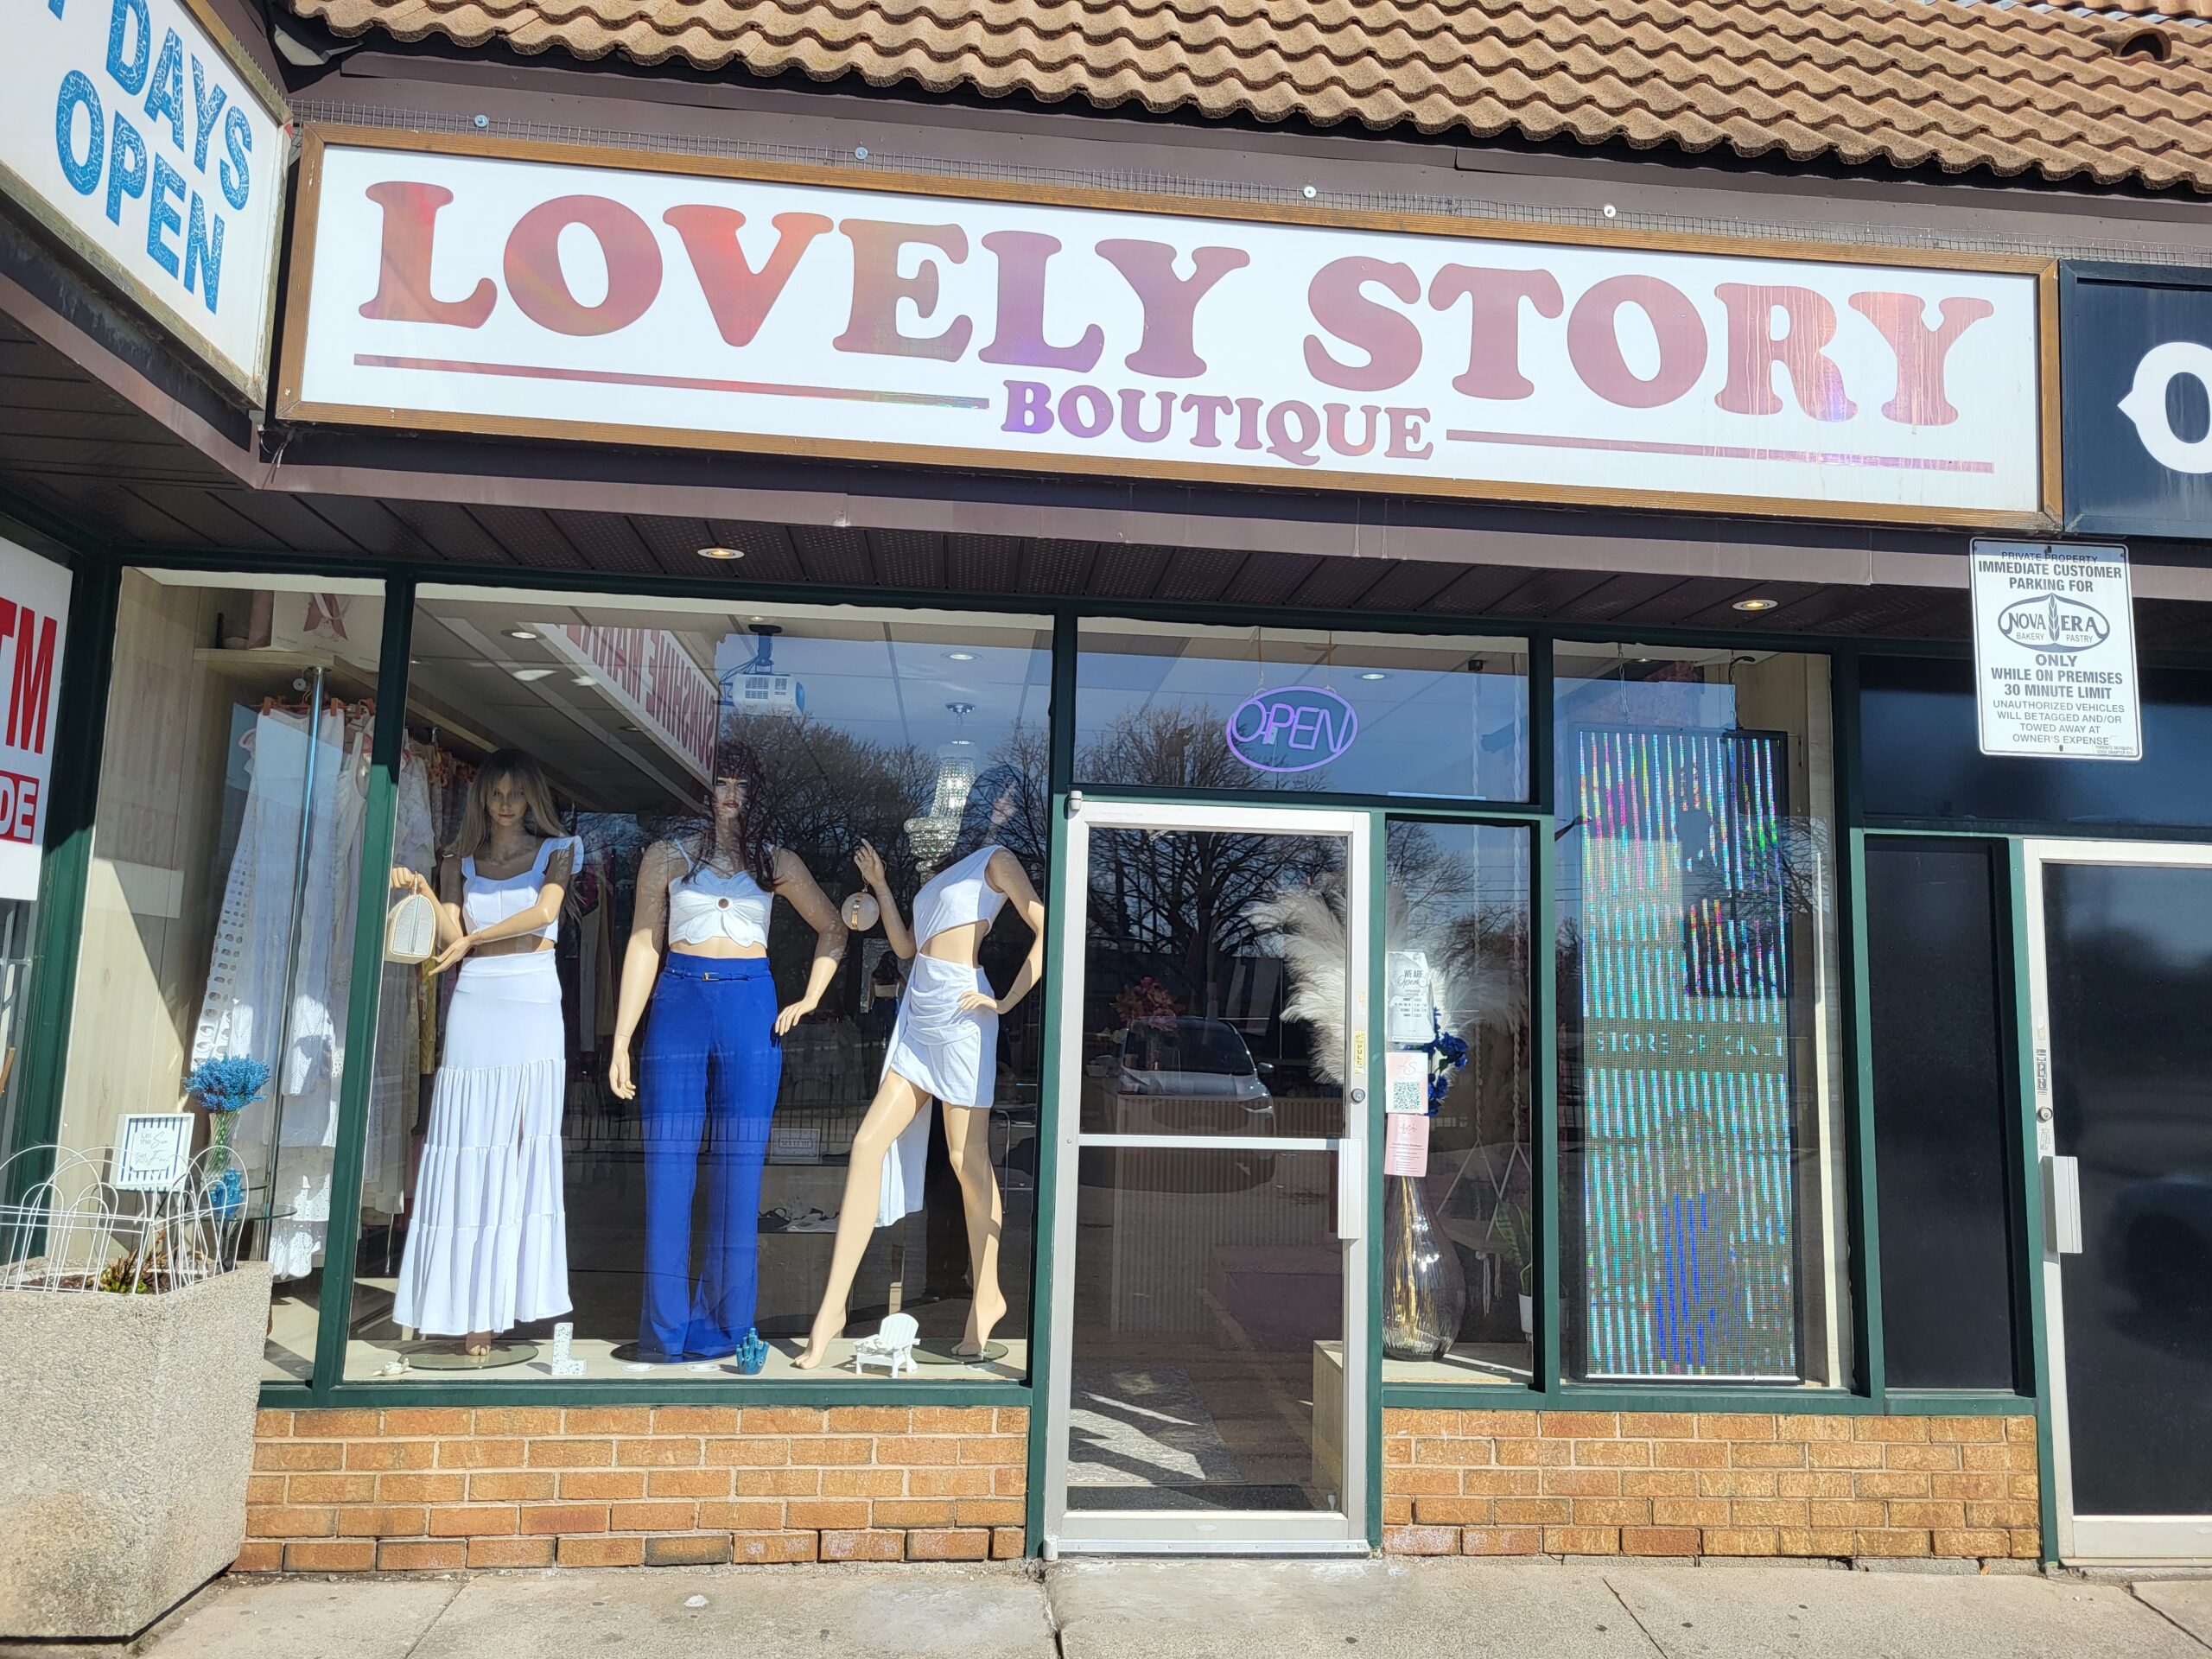 Featured image for “Lovely Story Boutique”